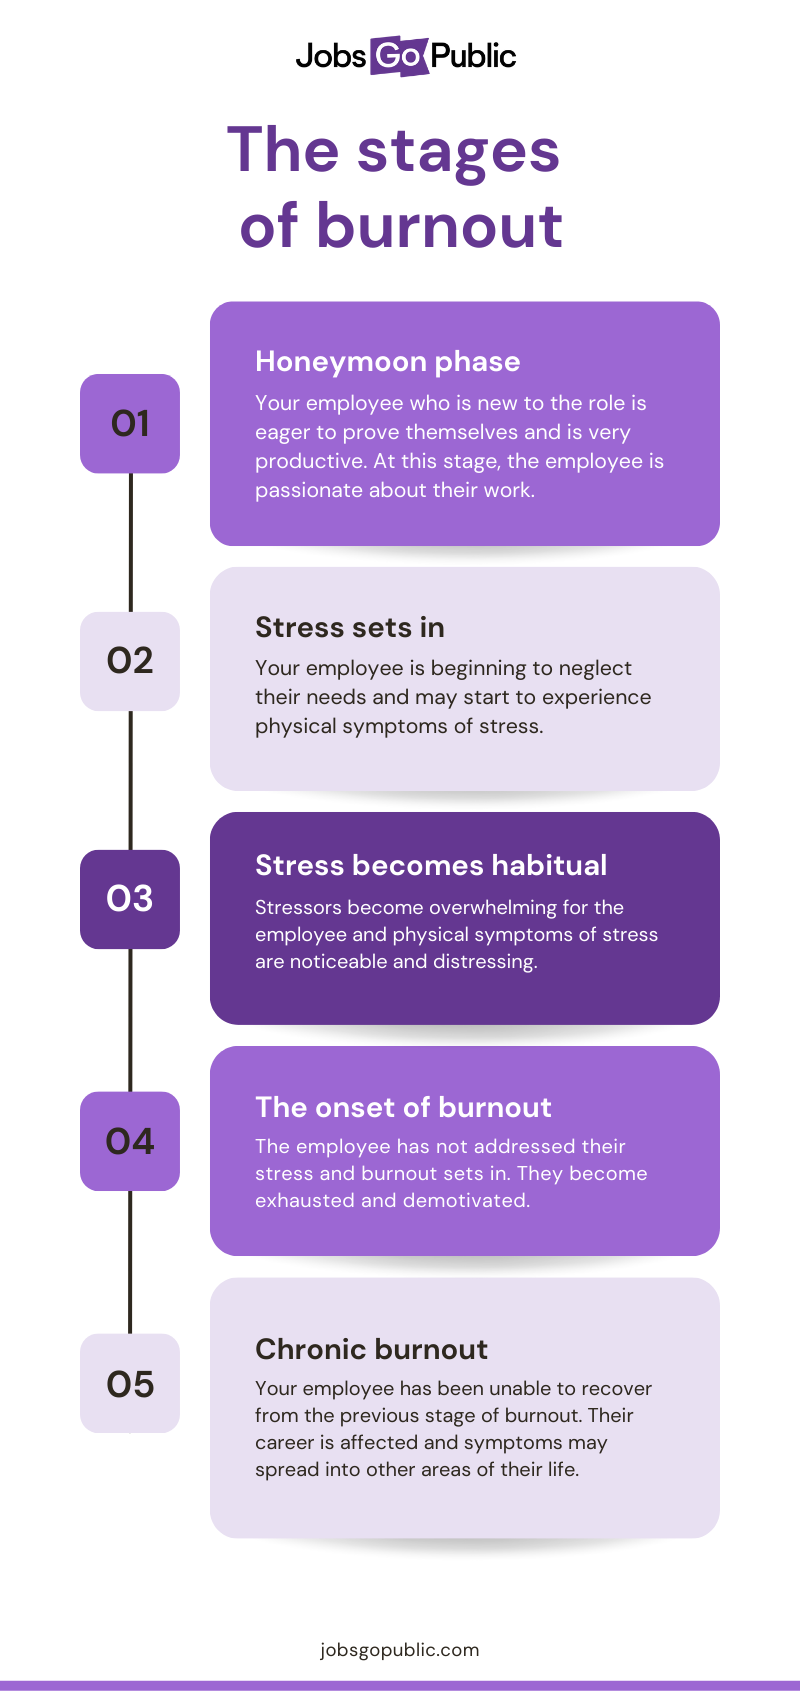 The stages of burnout infographic. 1. Honey moon phase: Your employee who is new to the role is eager to probe themselves and is very productive. At this stage, the employee is passionate about their work. 2. Stress sets in: Your employee is beginning to neglect their needs and may start to experience physical symptoms of stress. 3. Stress becomes habitual:  stressors become overwhelming for the employee and physical symptoms of stress are noticeable and distressing. 4. The onset of burnout: The employee has not addressed their stress and burnout sets in. They become exhausted and demotivated.  5. Chronic burnout: Your employee has been unable to recover from the previous stage of burnout. Their career is affected and symptoms of burnout spread into other areas of their life.